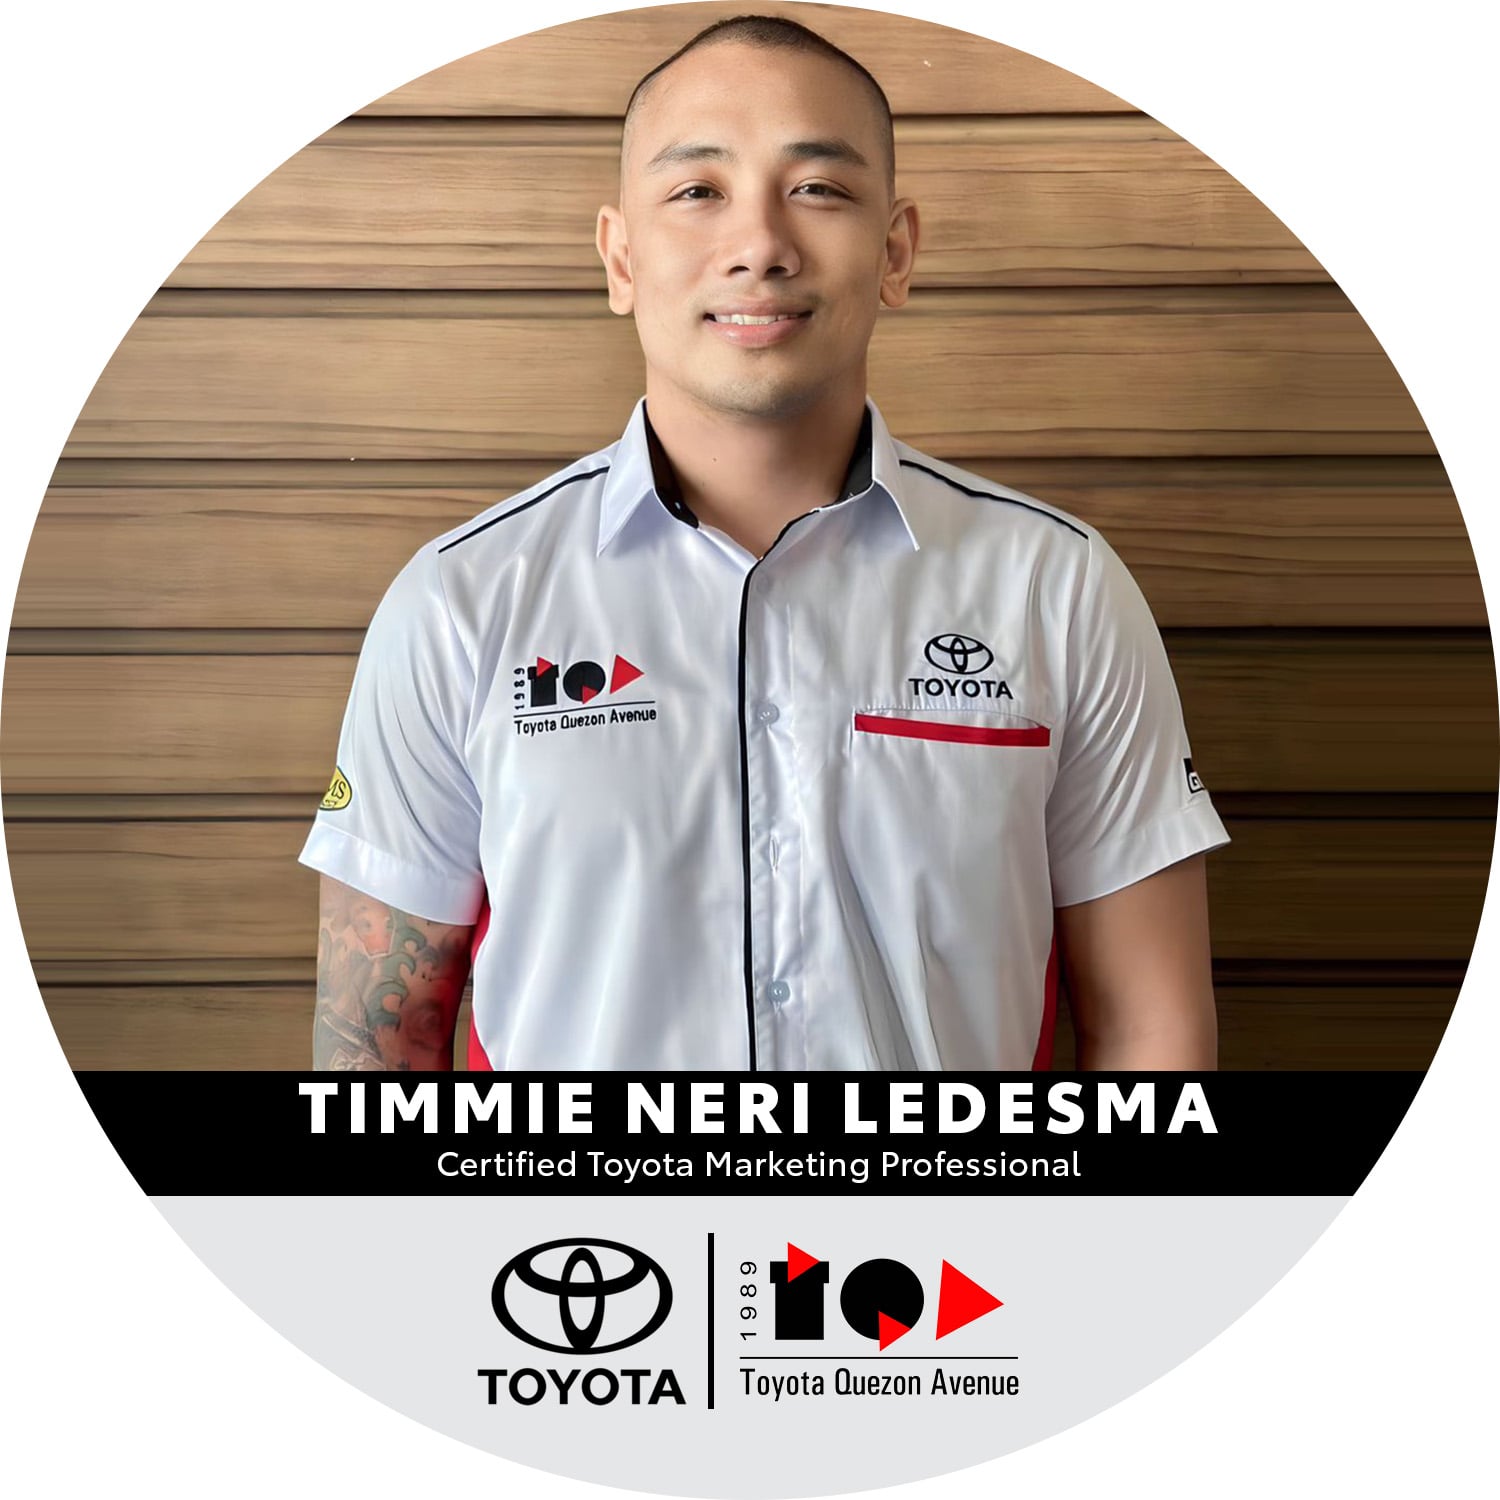 Certified Toyota Marketing Professionals - Timmie Neri Ledesma